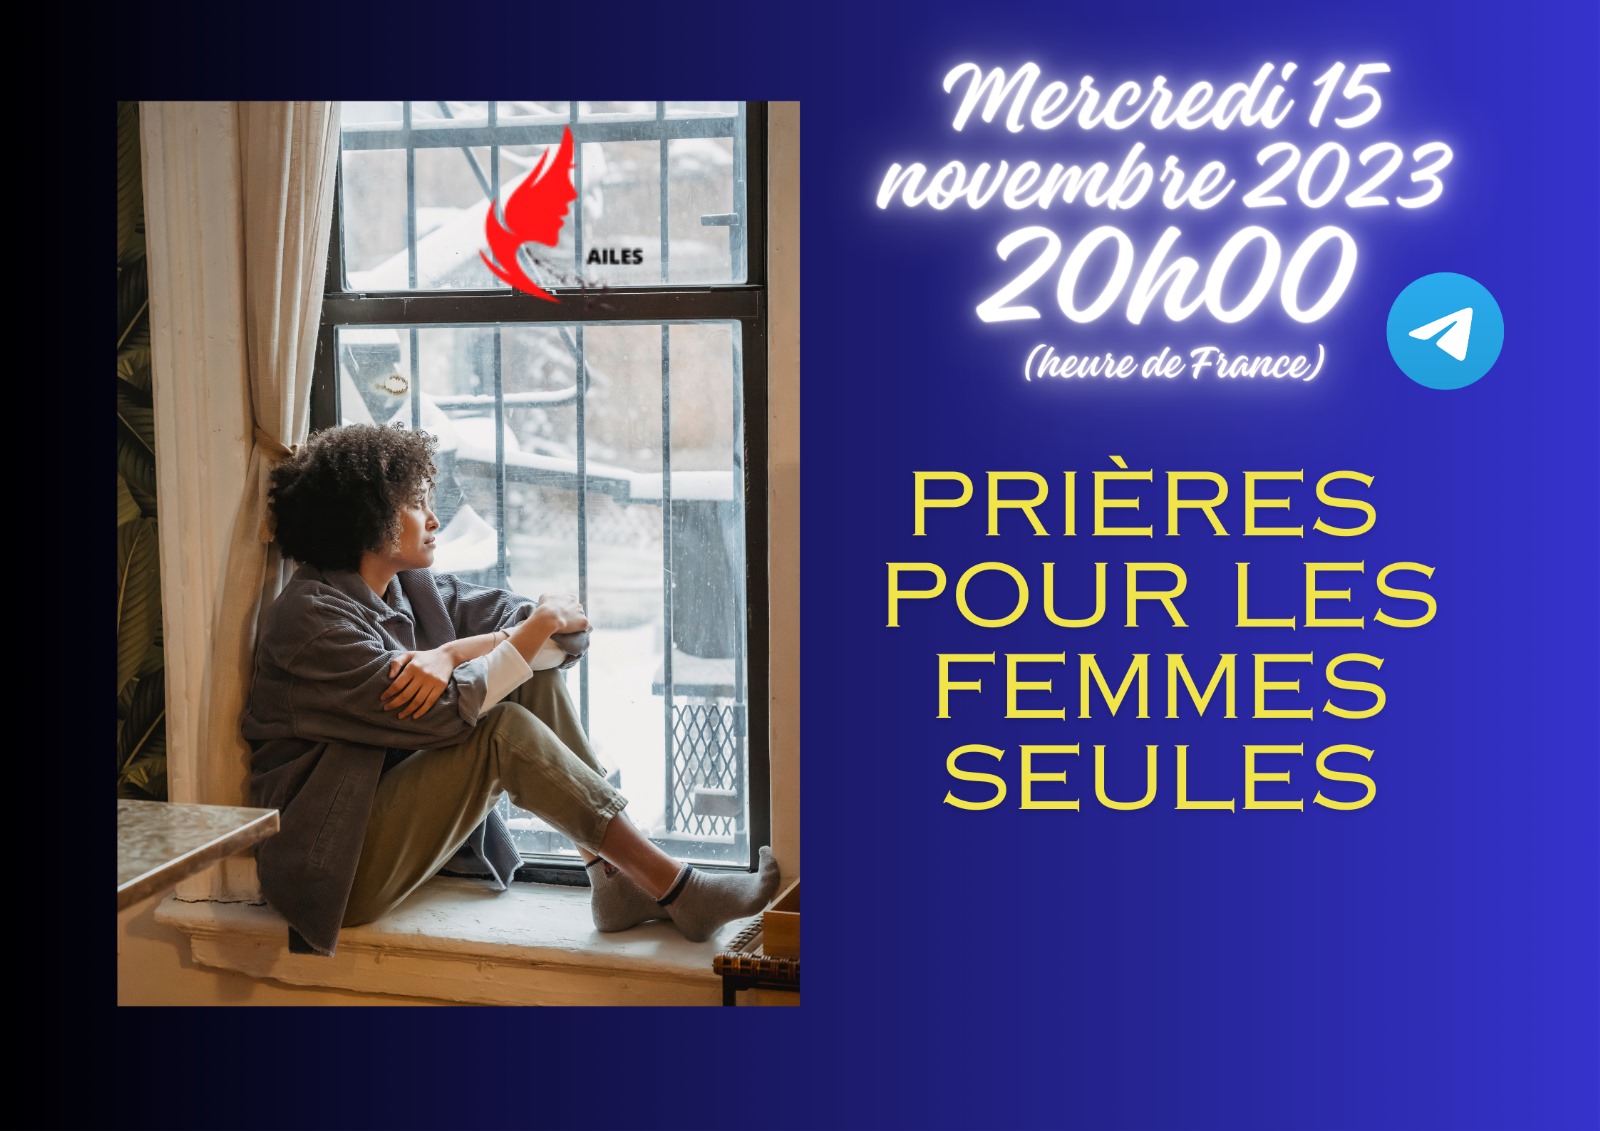 You are currently viewing Prières pour les femmes seules